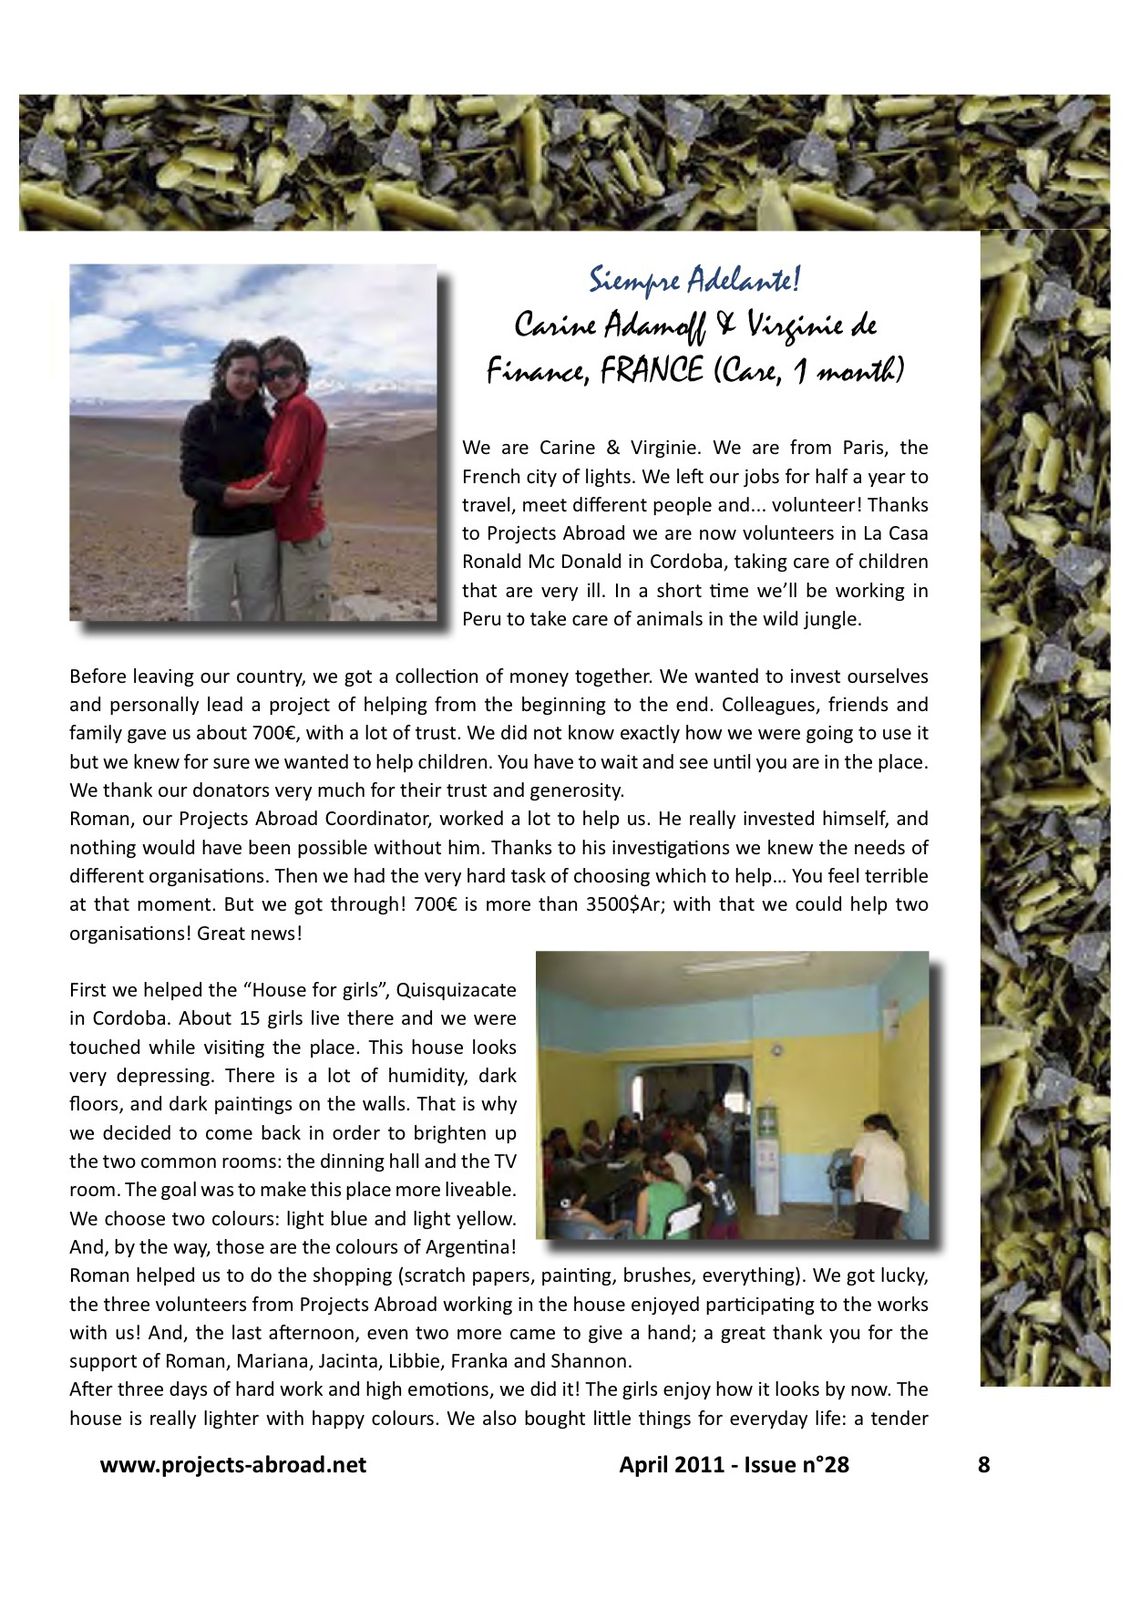 Our article Argentina-2011.04.01 - Newsletter